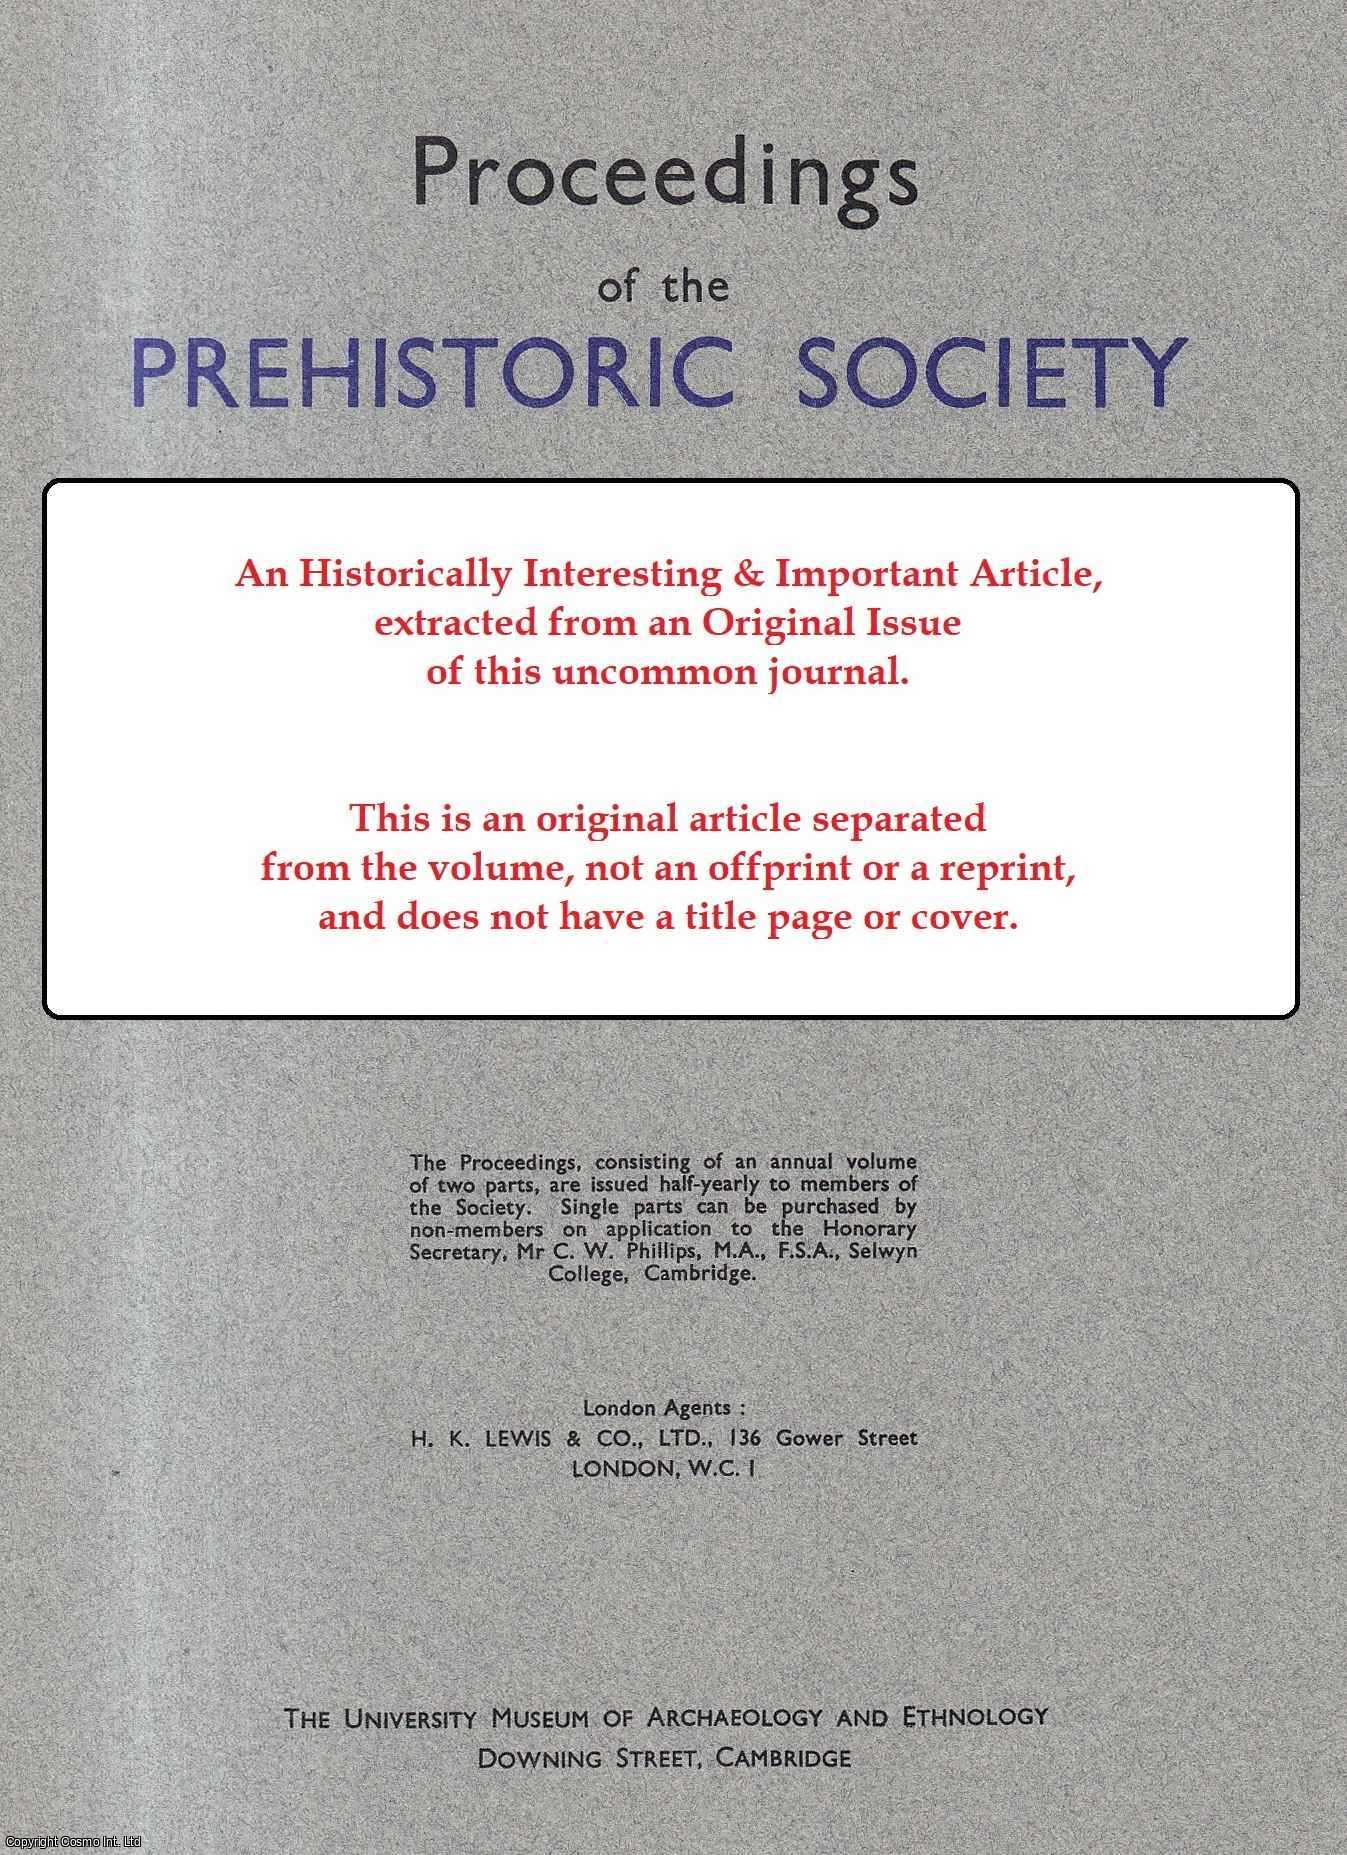 Ernst Sprockhoff - Central European Urnfield Culture and Celtic La Tene: An Outline. An original article from Proceedings of the Prehistoric Society, 1955.